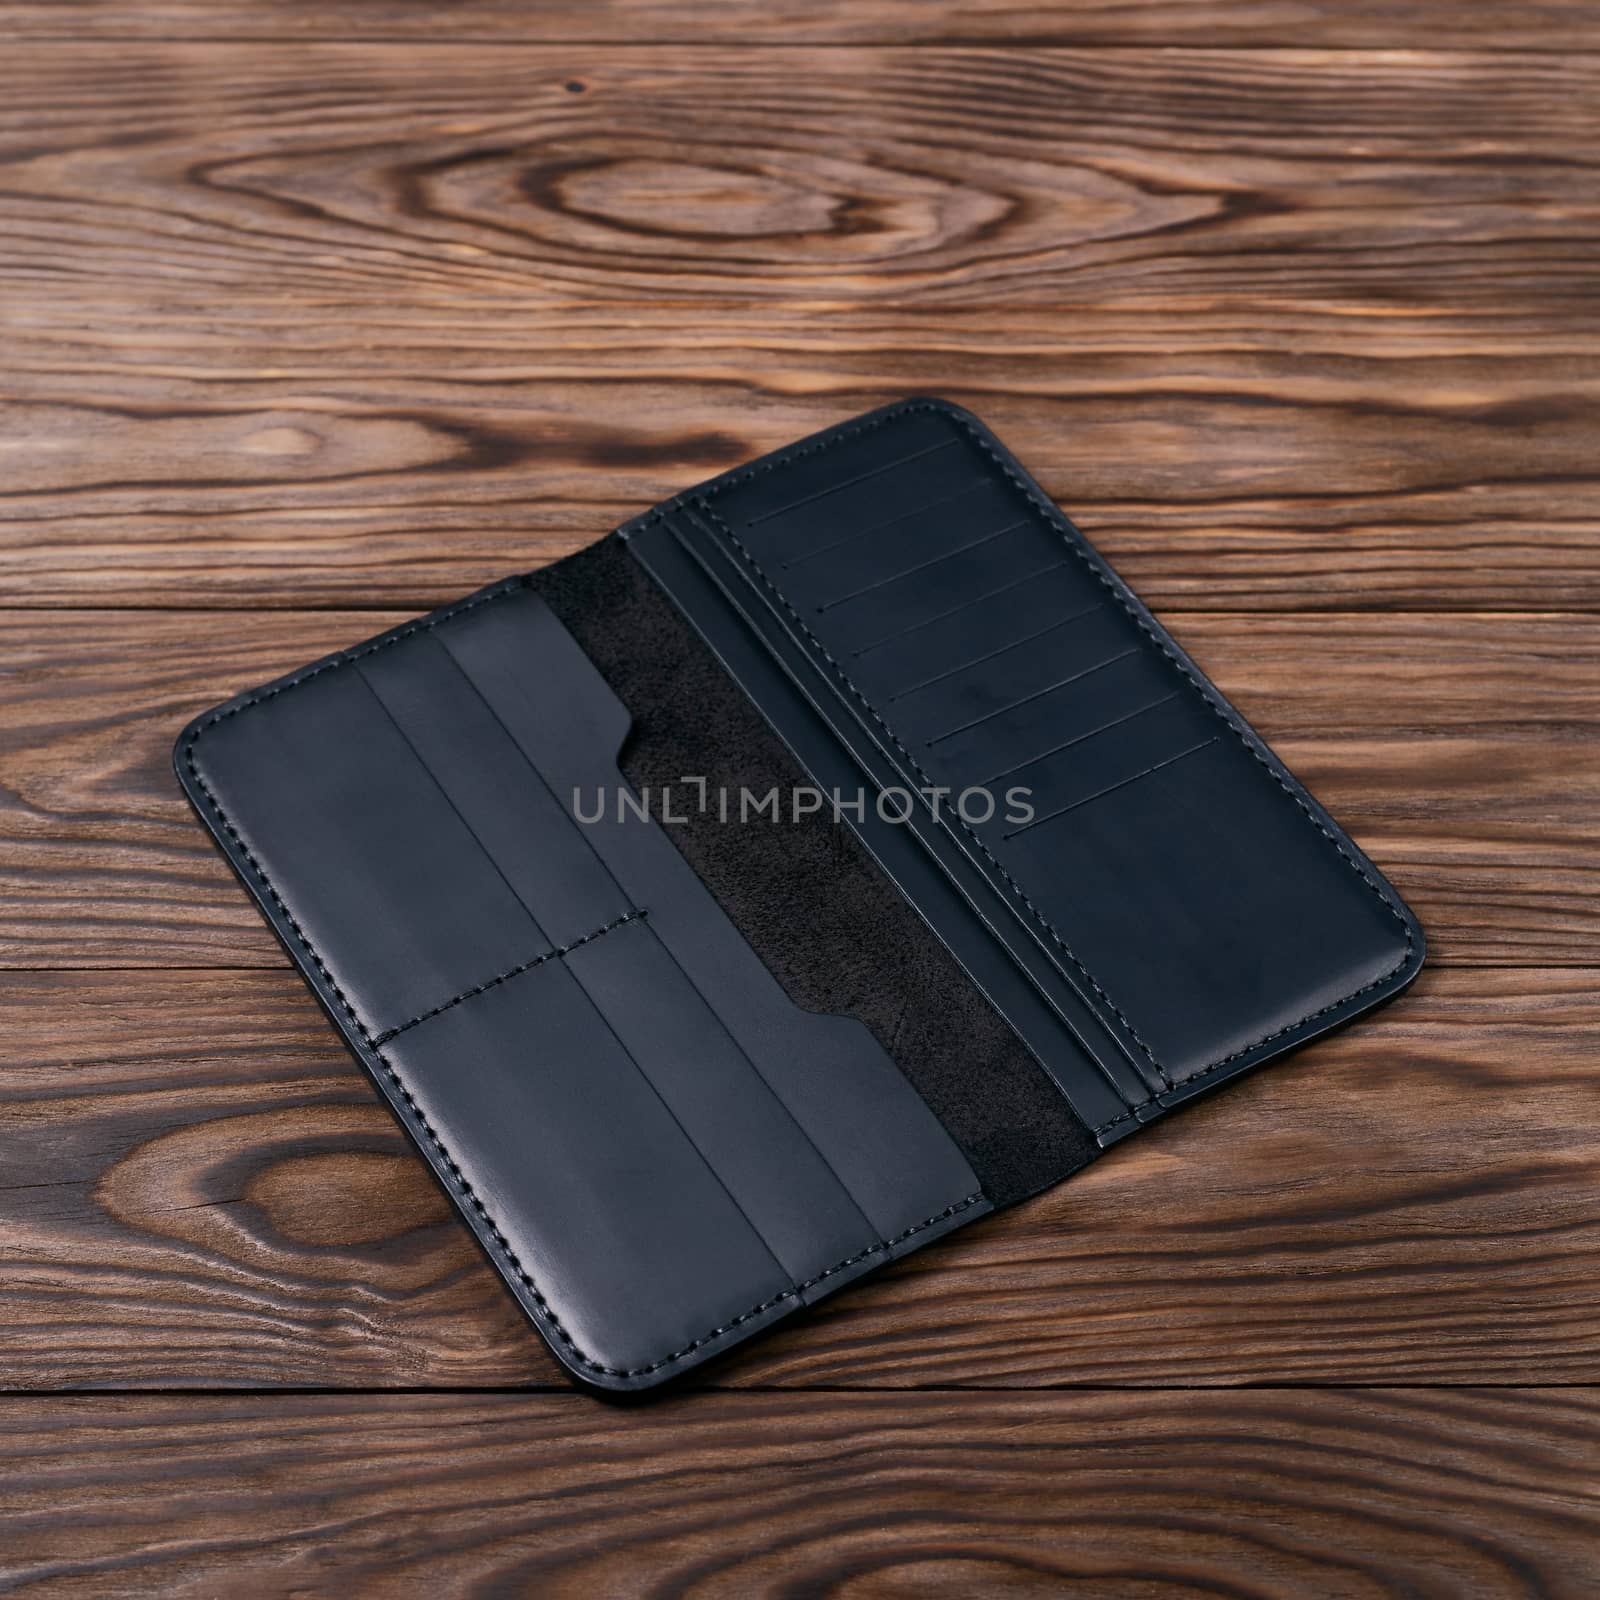 Black color handmade leather porte-monnaie on wooden textured background. Purse is opened and empty. Side view. Stock photo of luxury accessories.